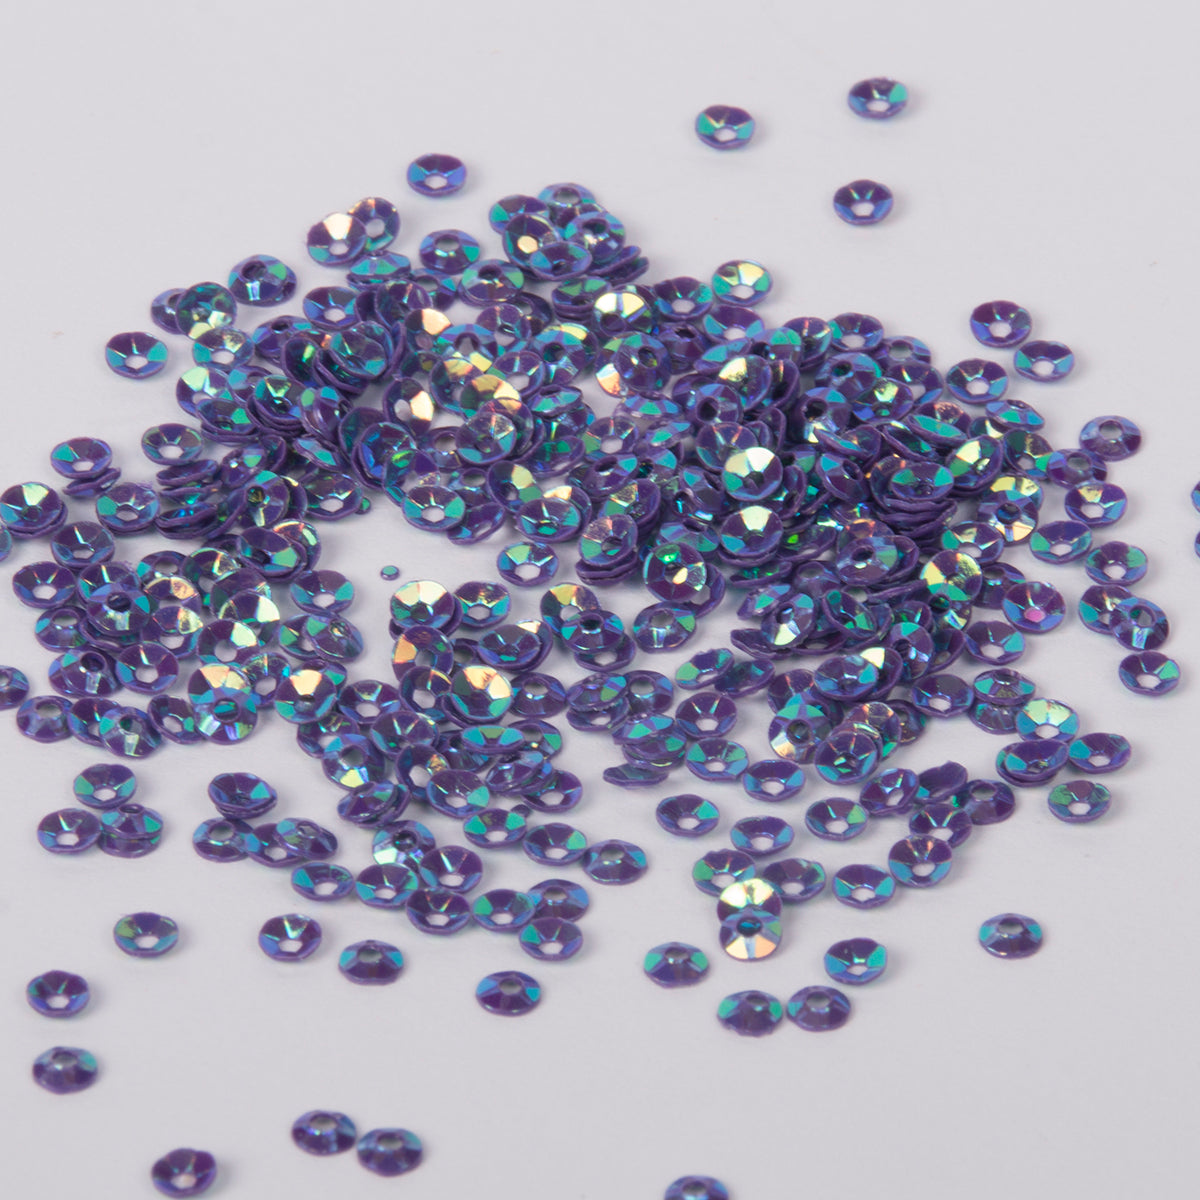 www,colourstreams.com.au Colour Streams Sequins Cup 3mm Mauve with Green and Blue Lights Circle Purples